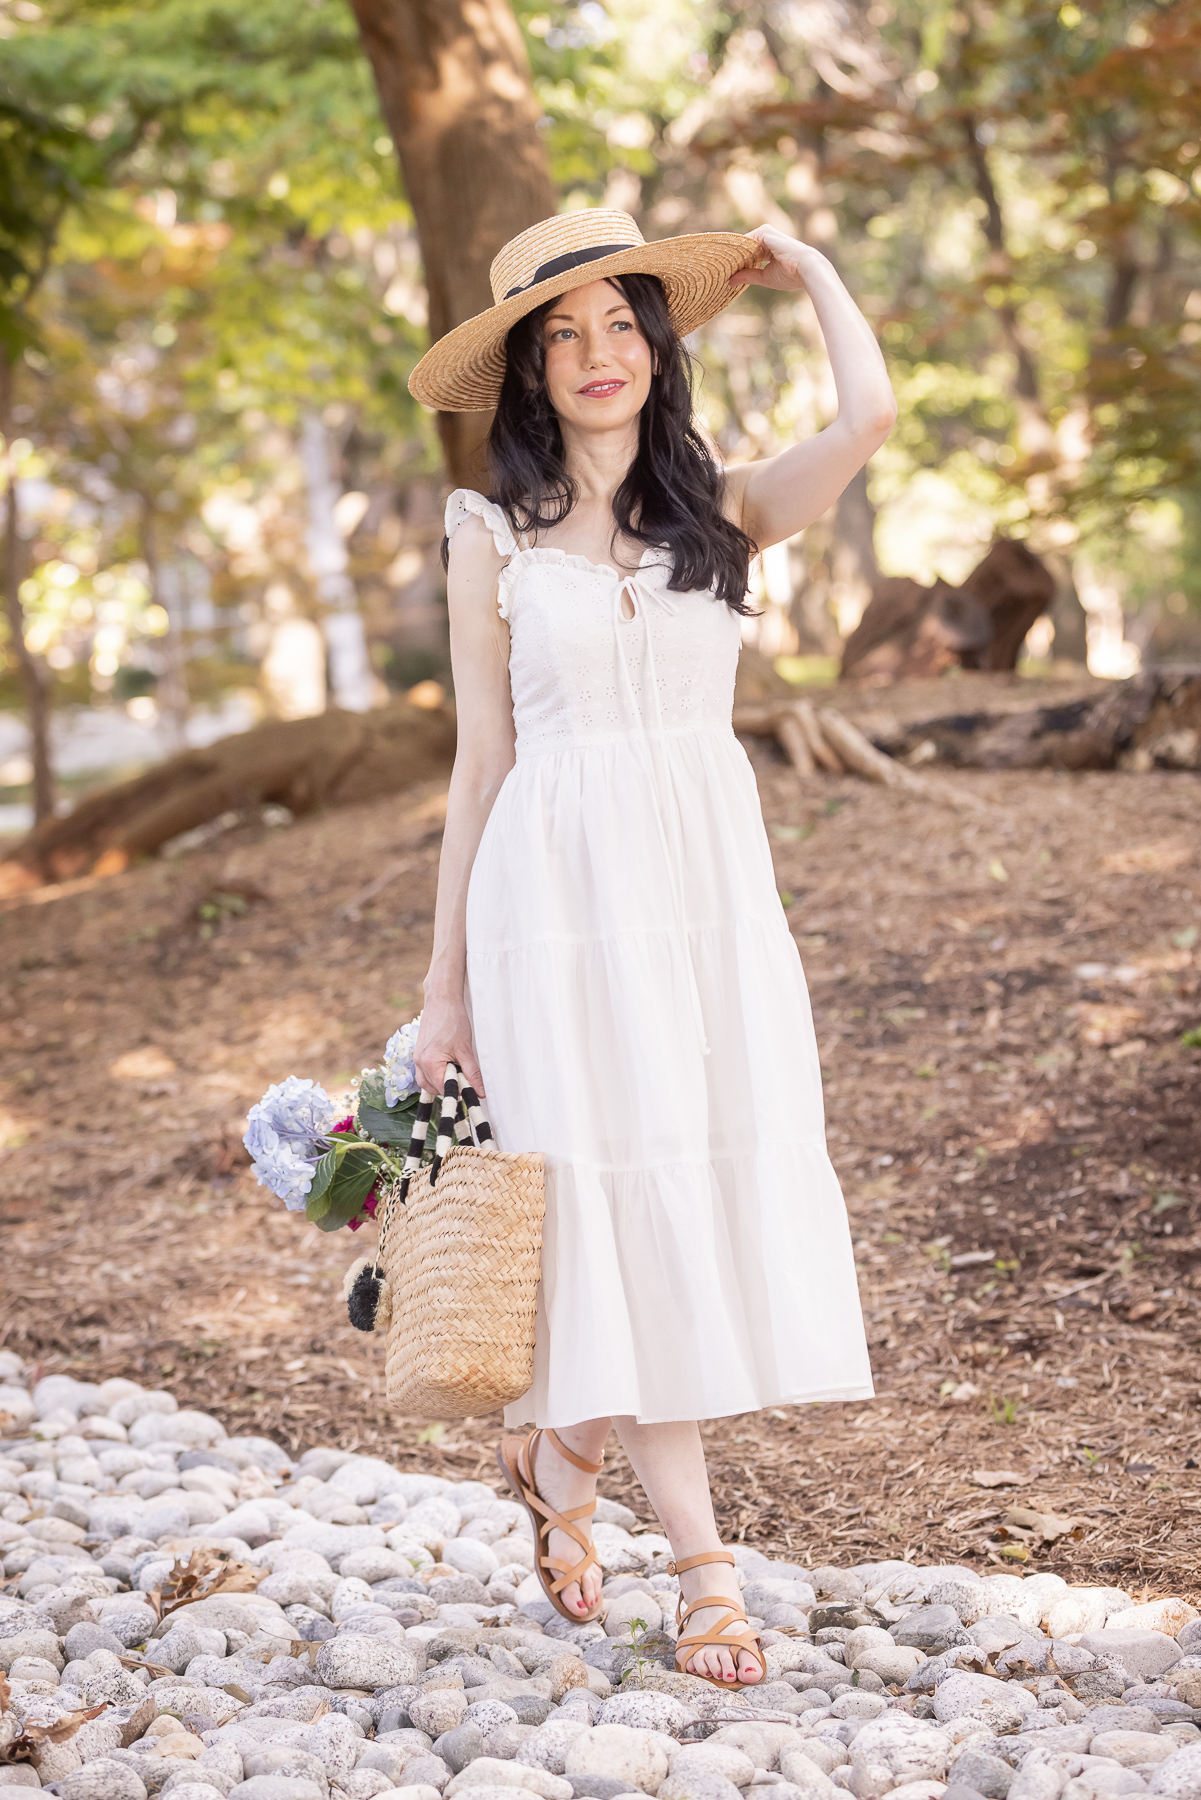 Simple Retro Cottagecore Dress styled by top Dallas fashion blogger, Pretty Little Shoppers